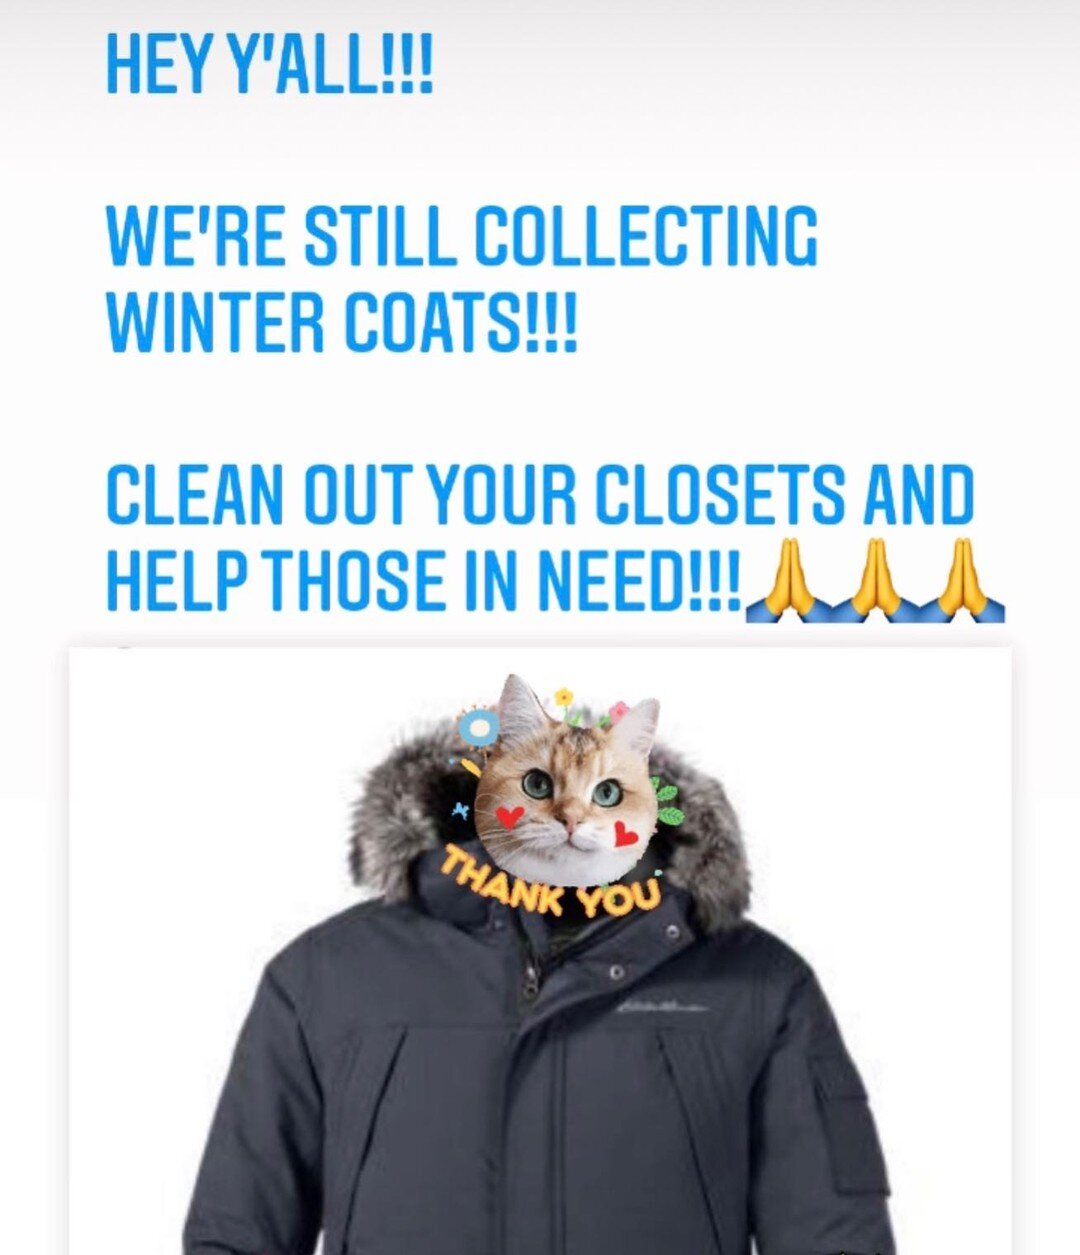 Got extra winter coats?? Wanna help your community??? Drop &lsquo;em off here @farrenspub , and thee wonderful @heymikeingram will take care of the rest!!!
&bull;
&bull;
&bull;
#helpingothers #wintercoats #spreadthelove #supportyourcommunity